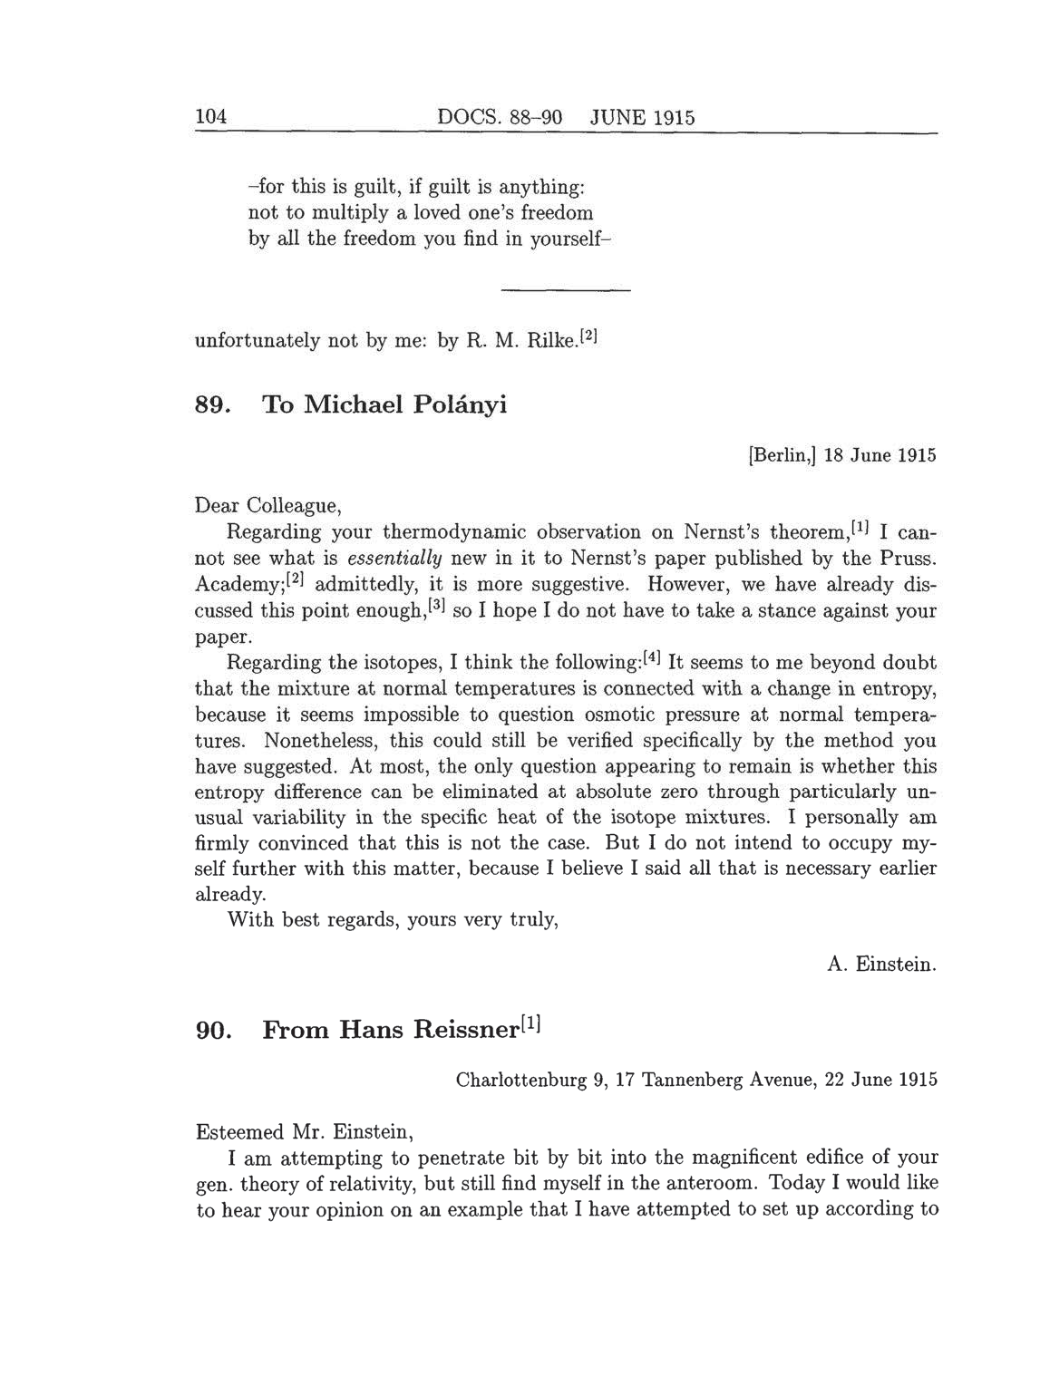 Volume 8: The Berlin Years: Correspondence, 1914-1918 (English translation supplement) page 104